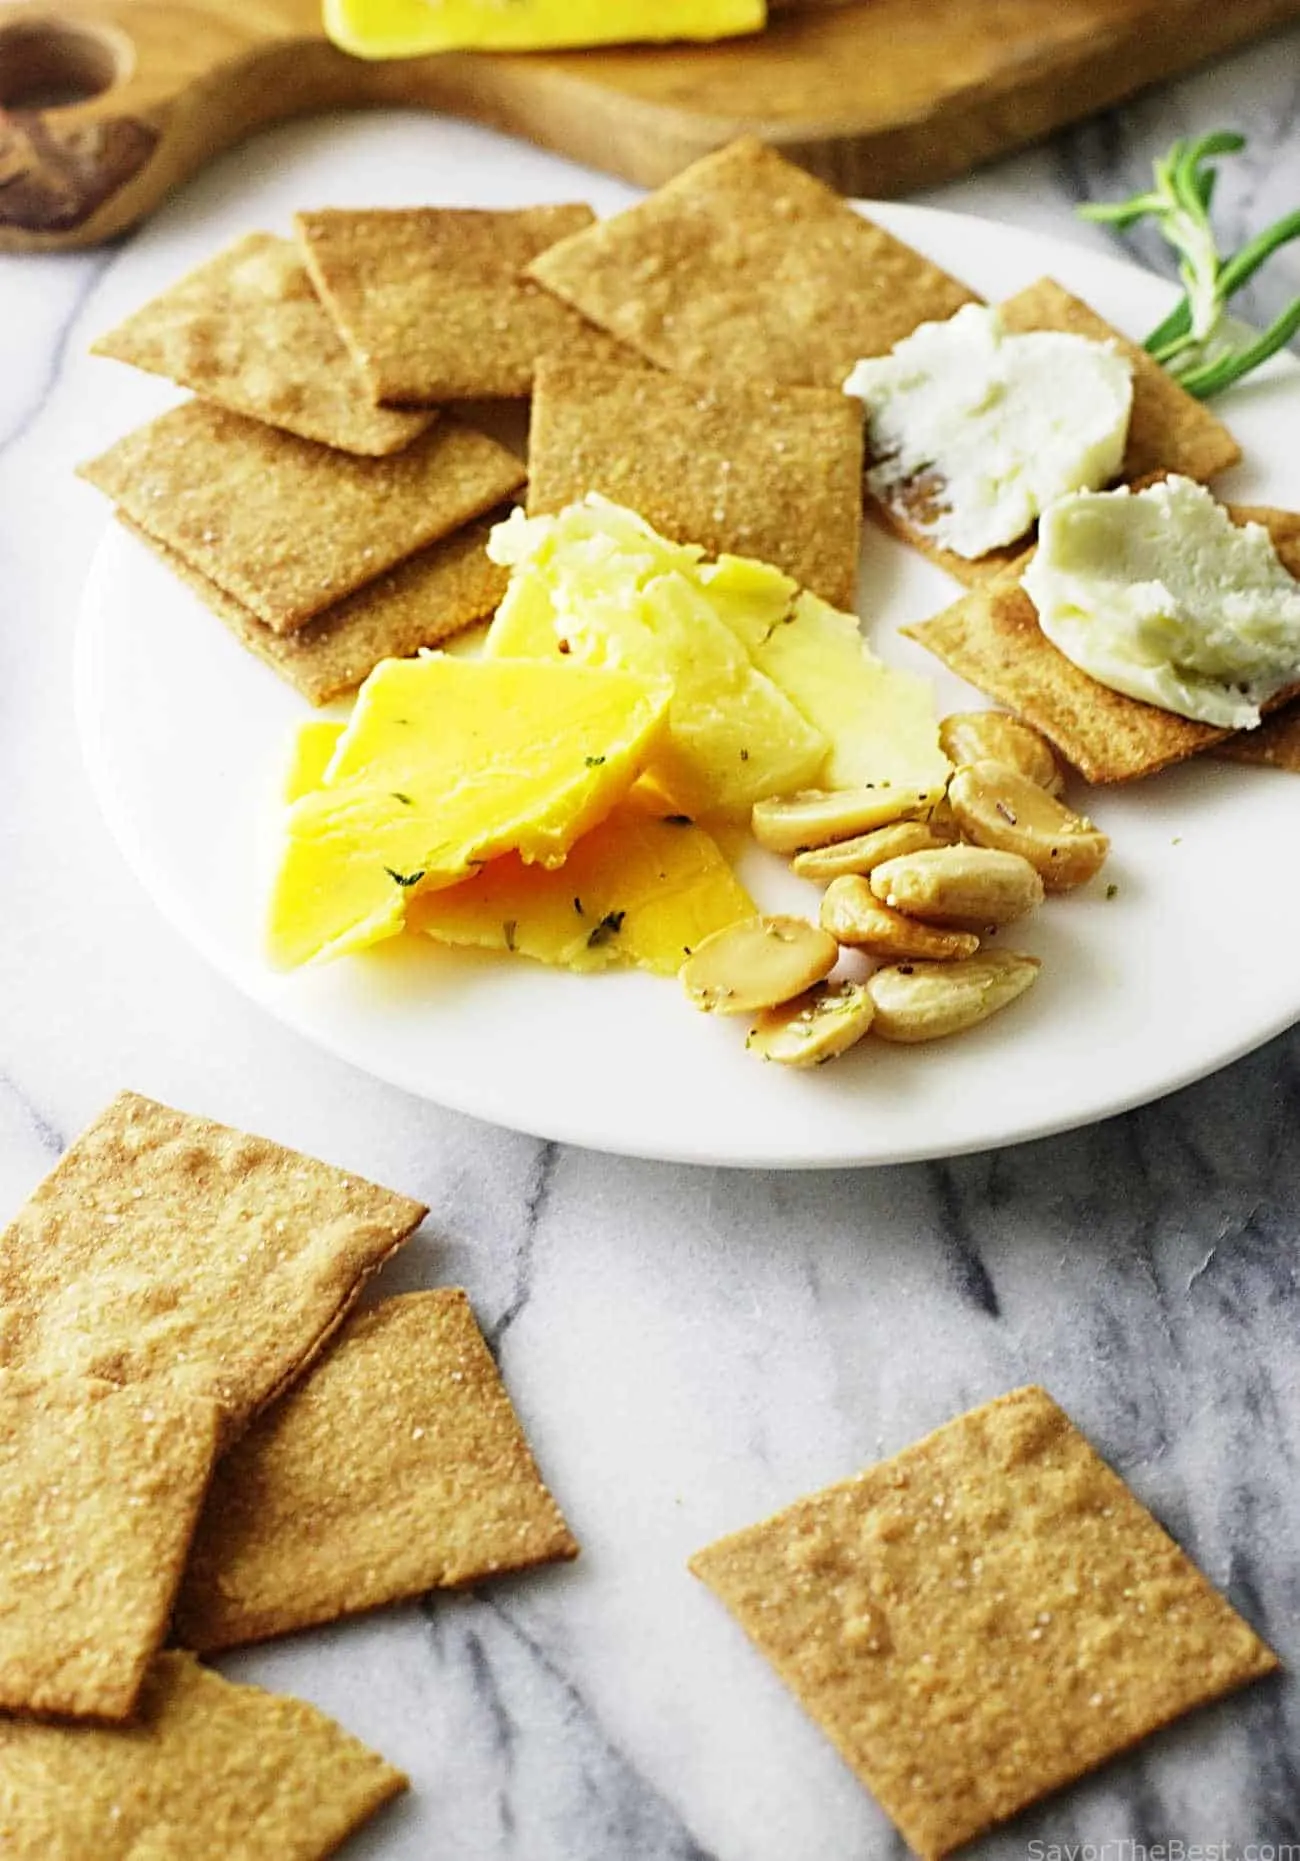 Crackers on a plate with cheese and nuts